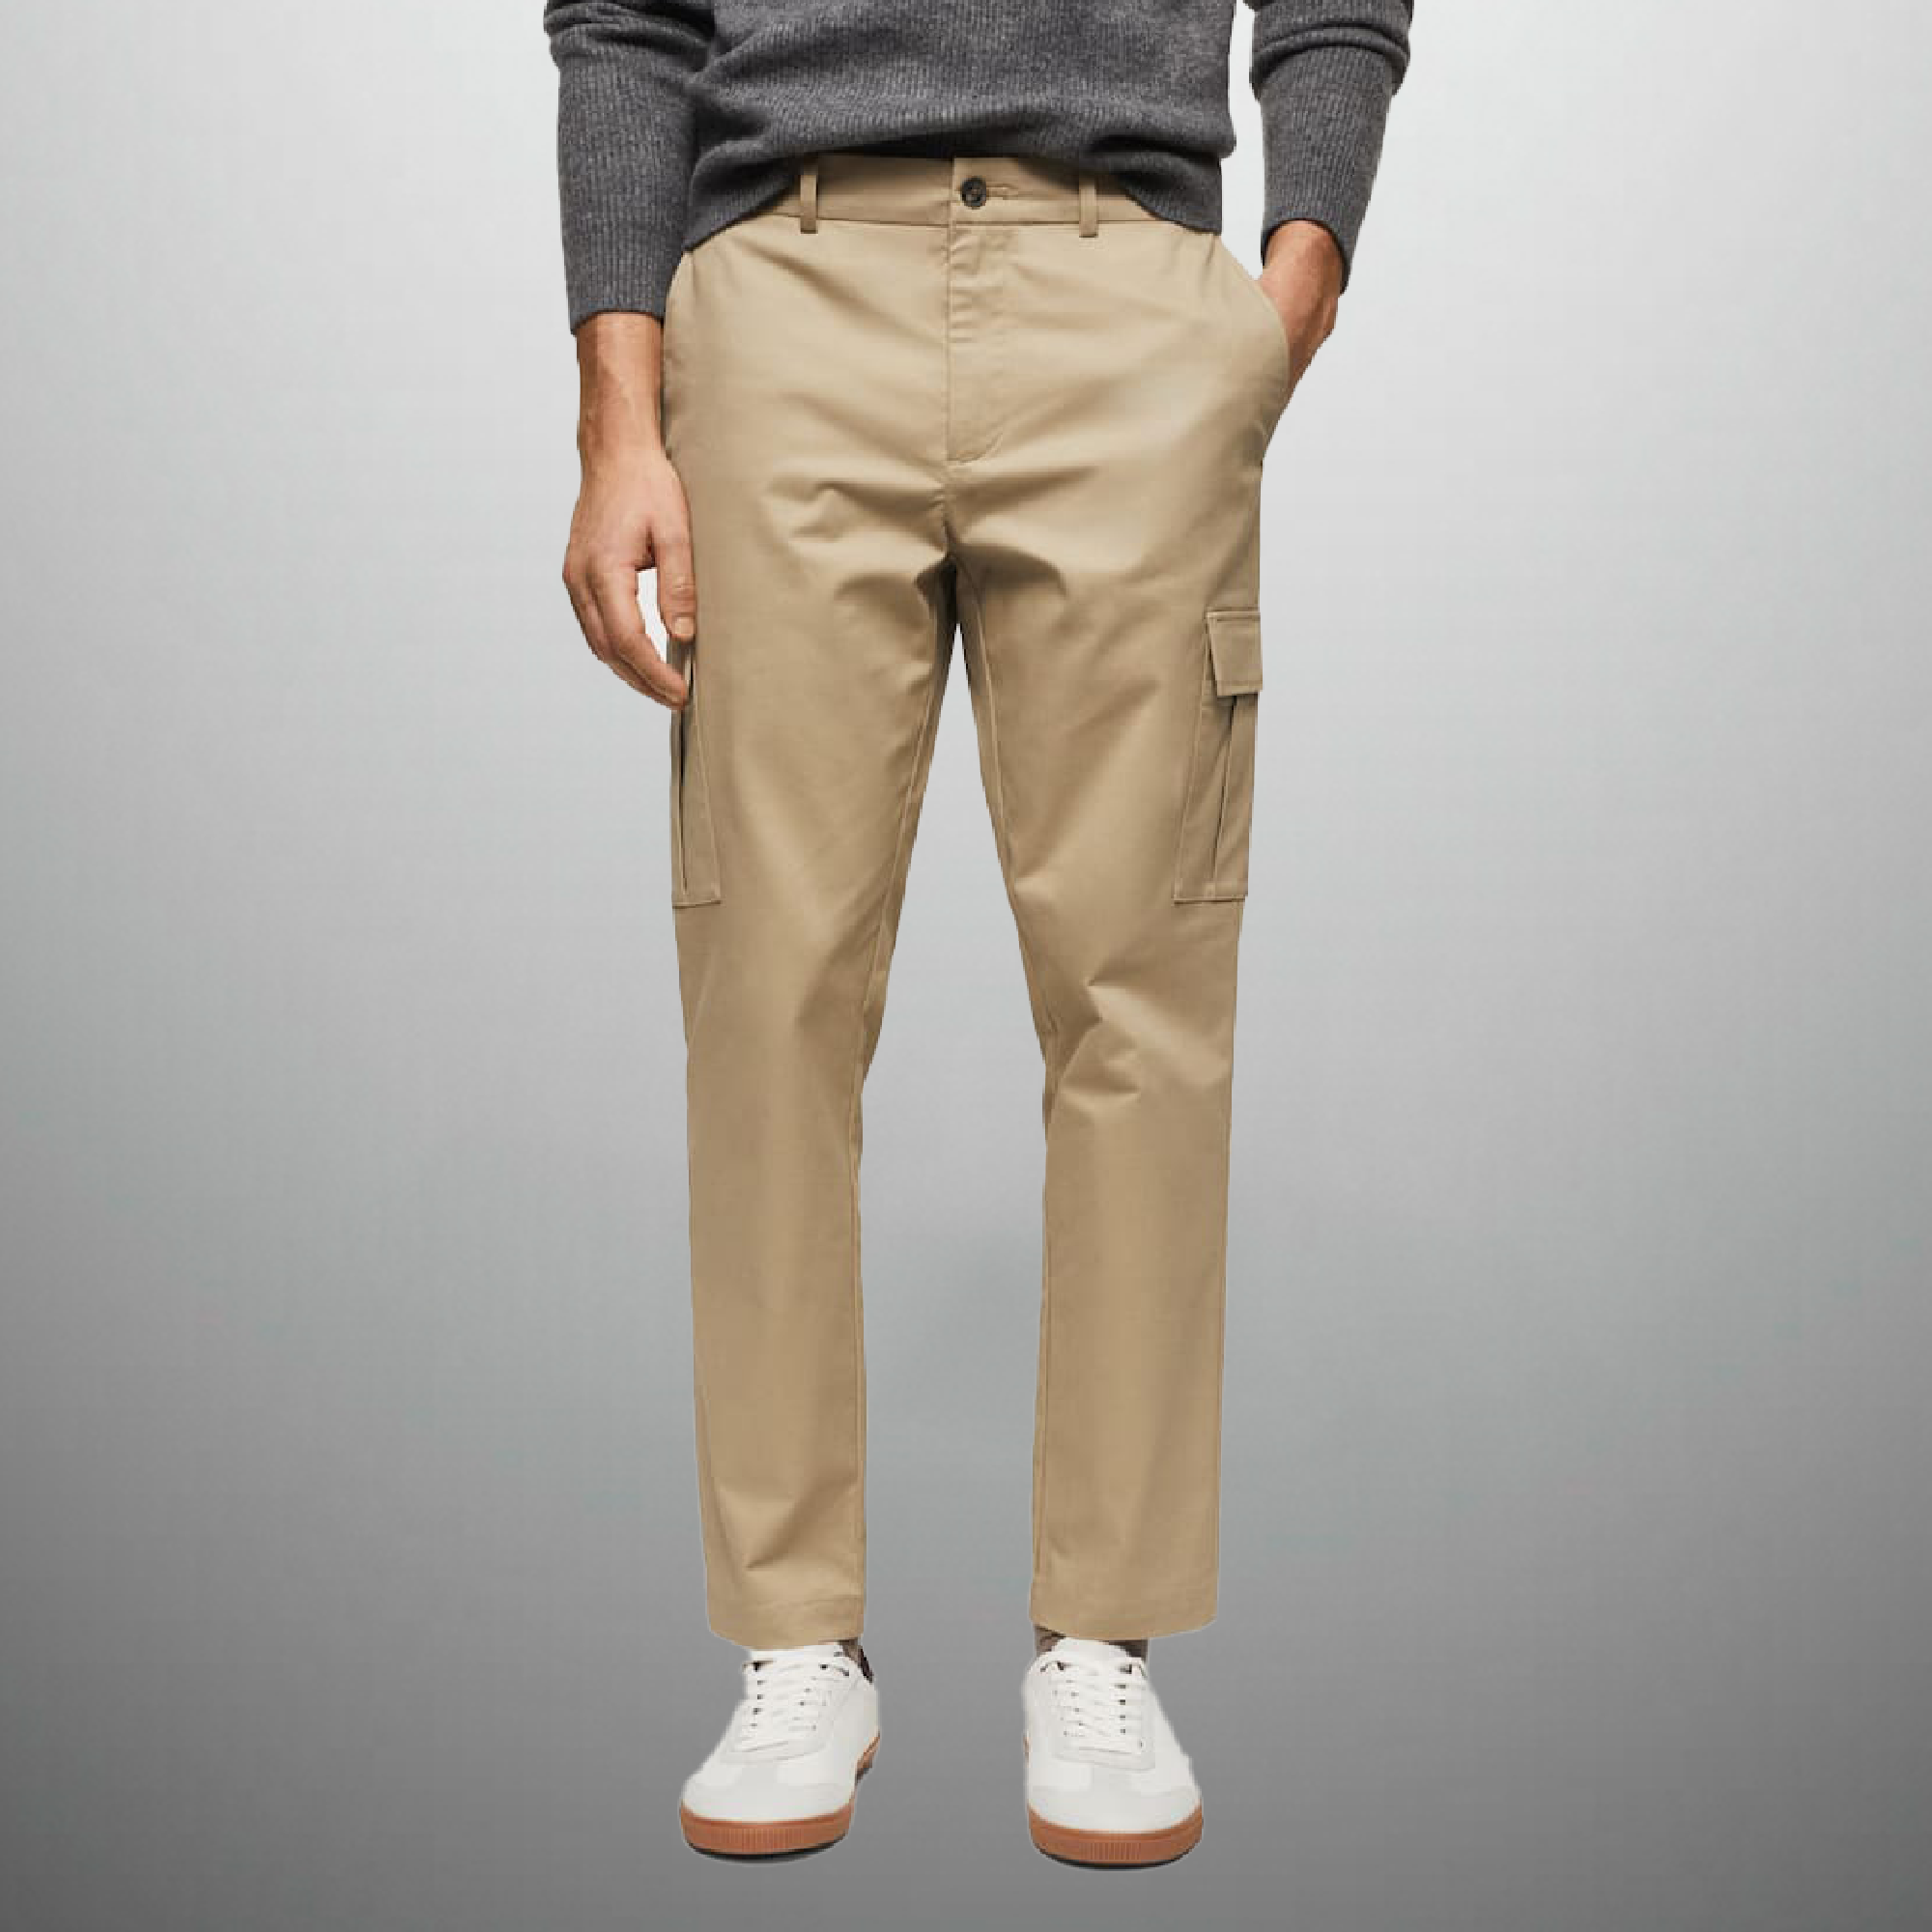 Men's Beige Relaxed Fit Cargo Pant-RMT008